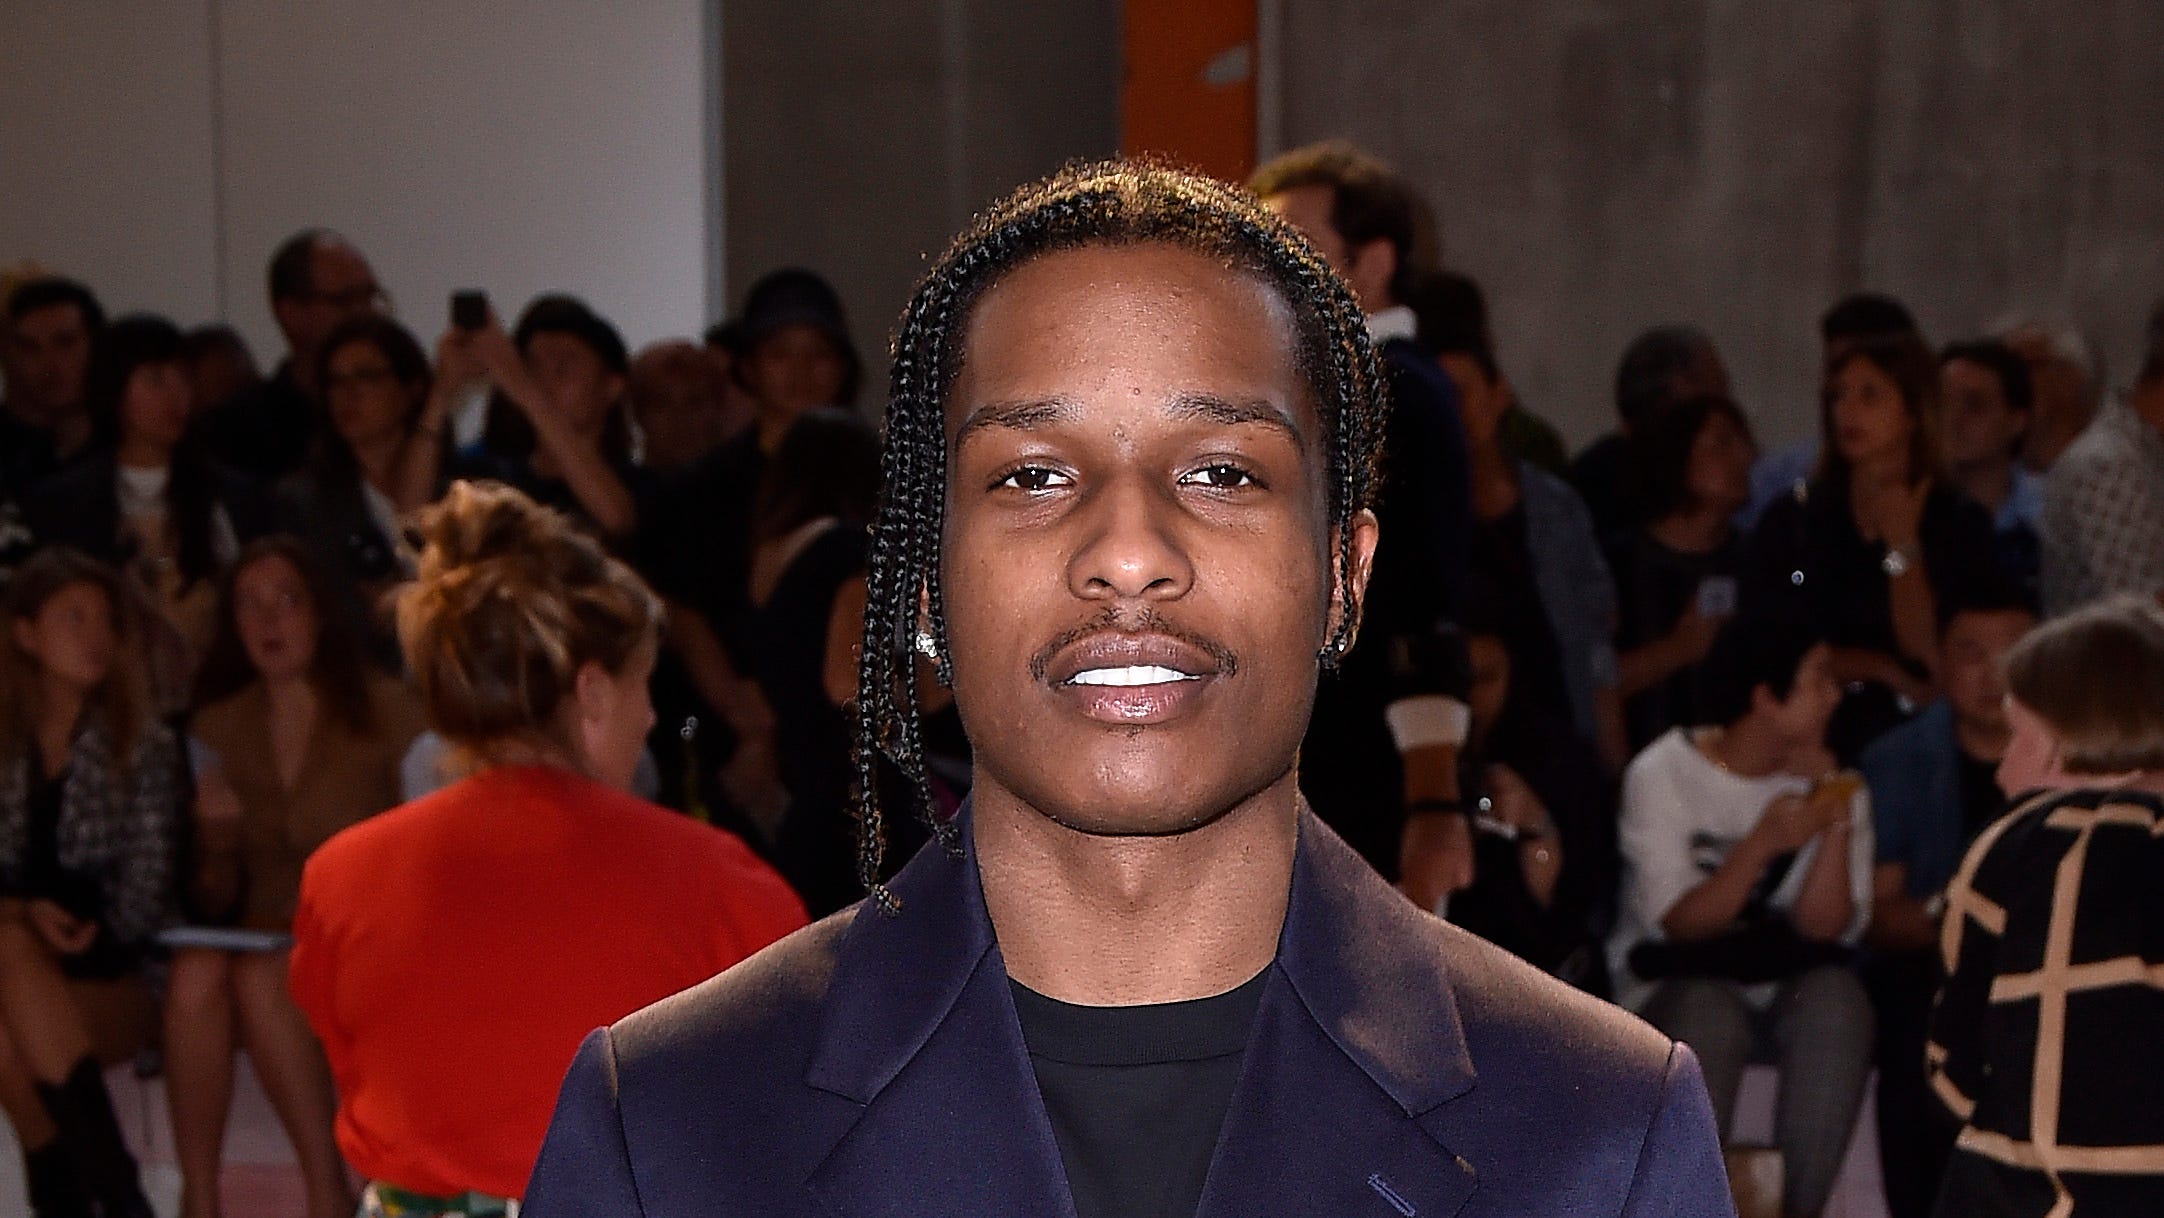 ASAP Rocky arrest: Rapper out on bail following shooting investigation